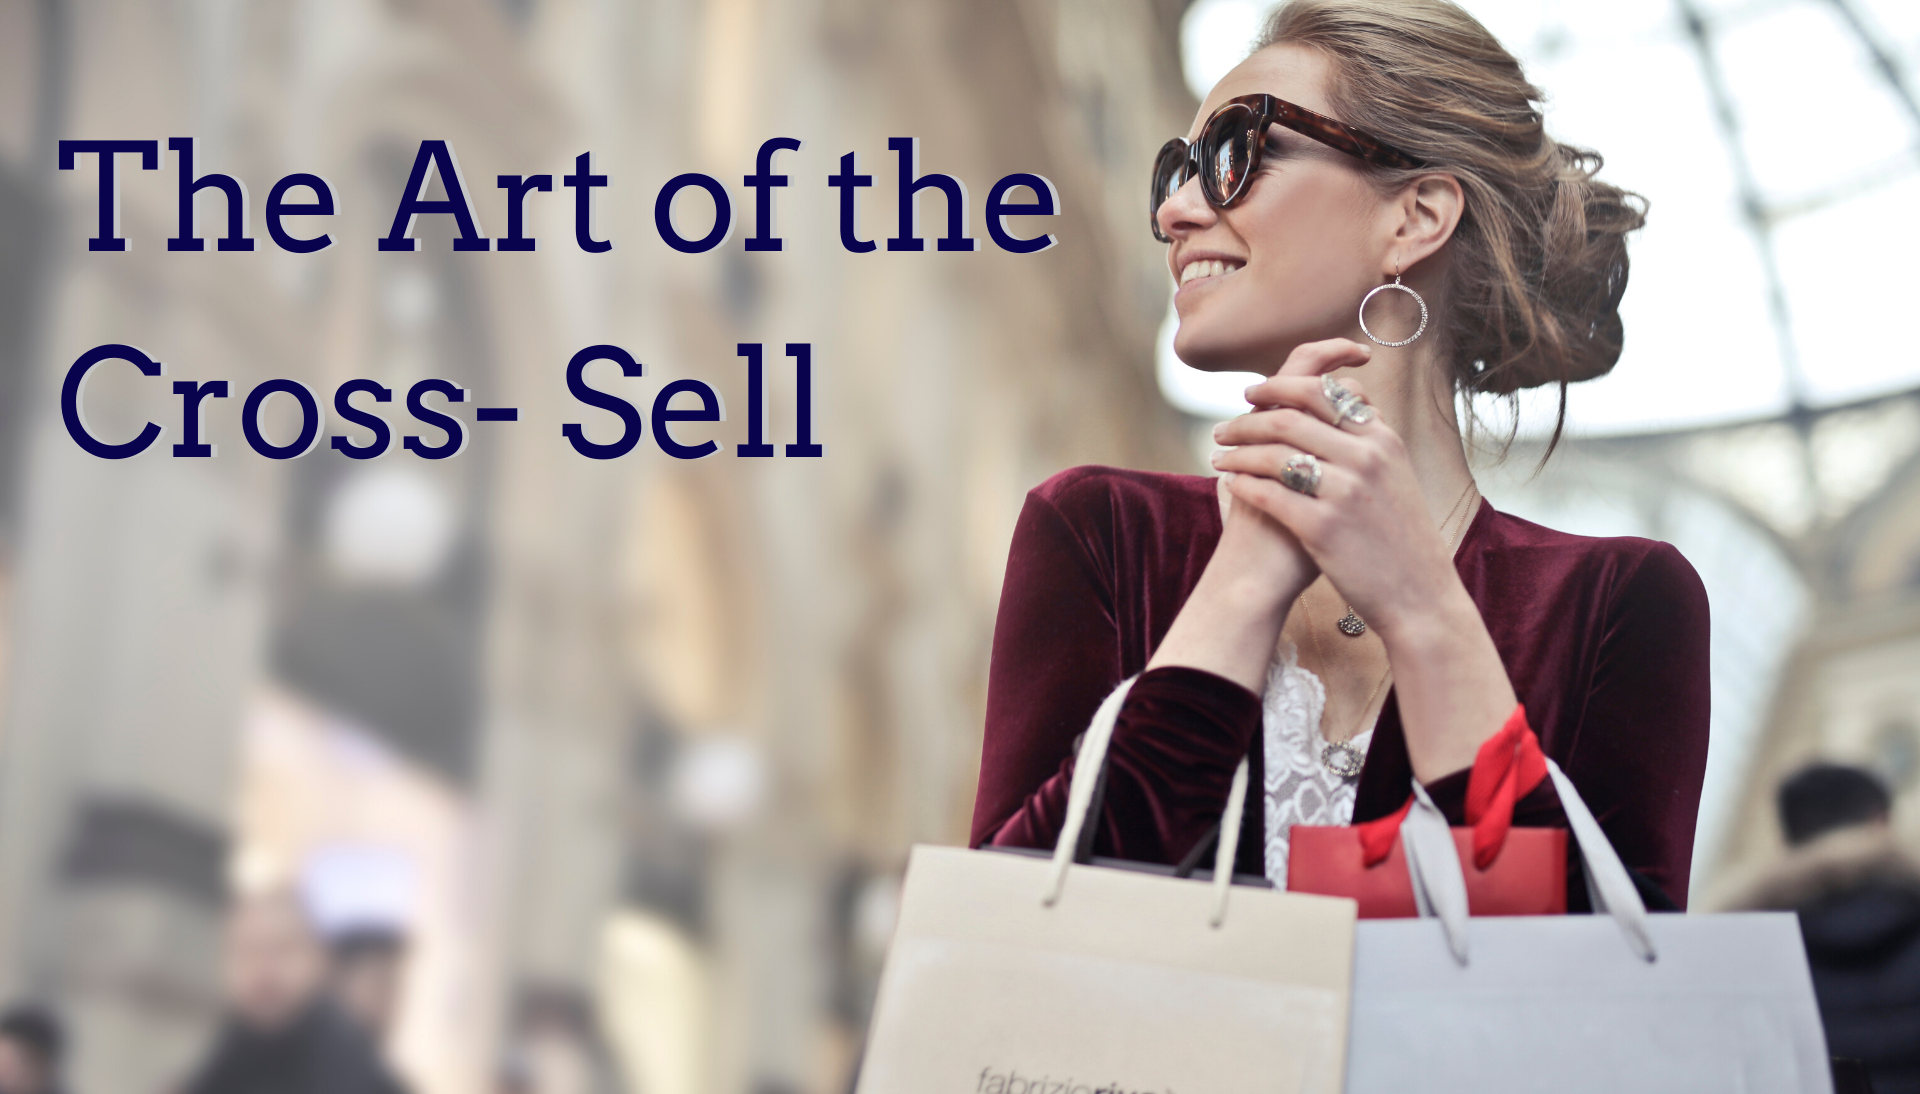 The Art of the Cross- Sell